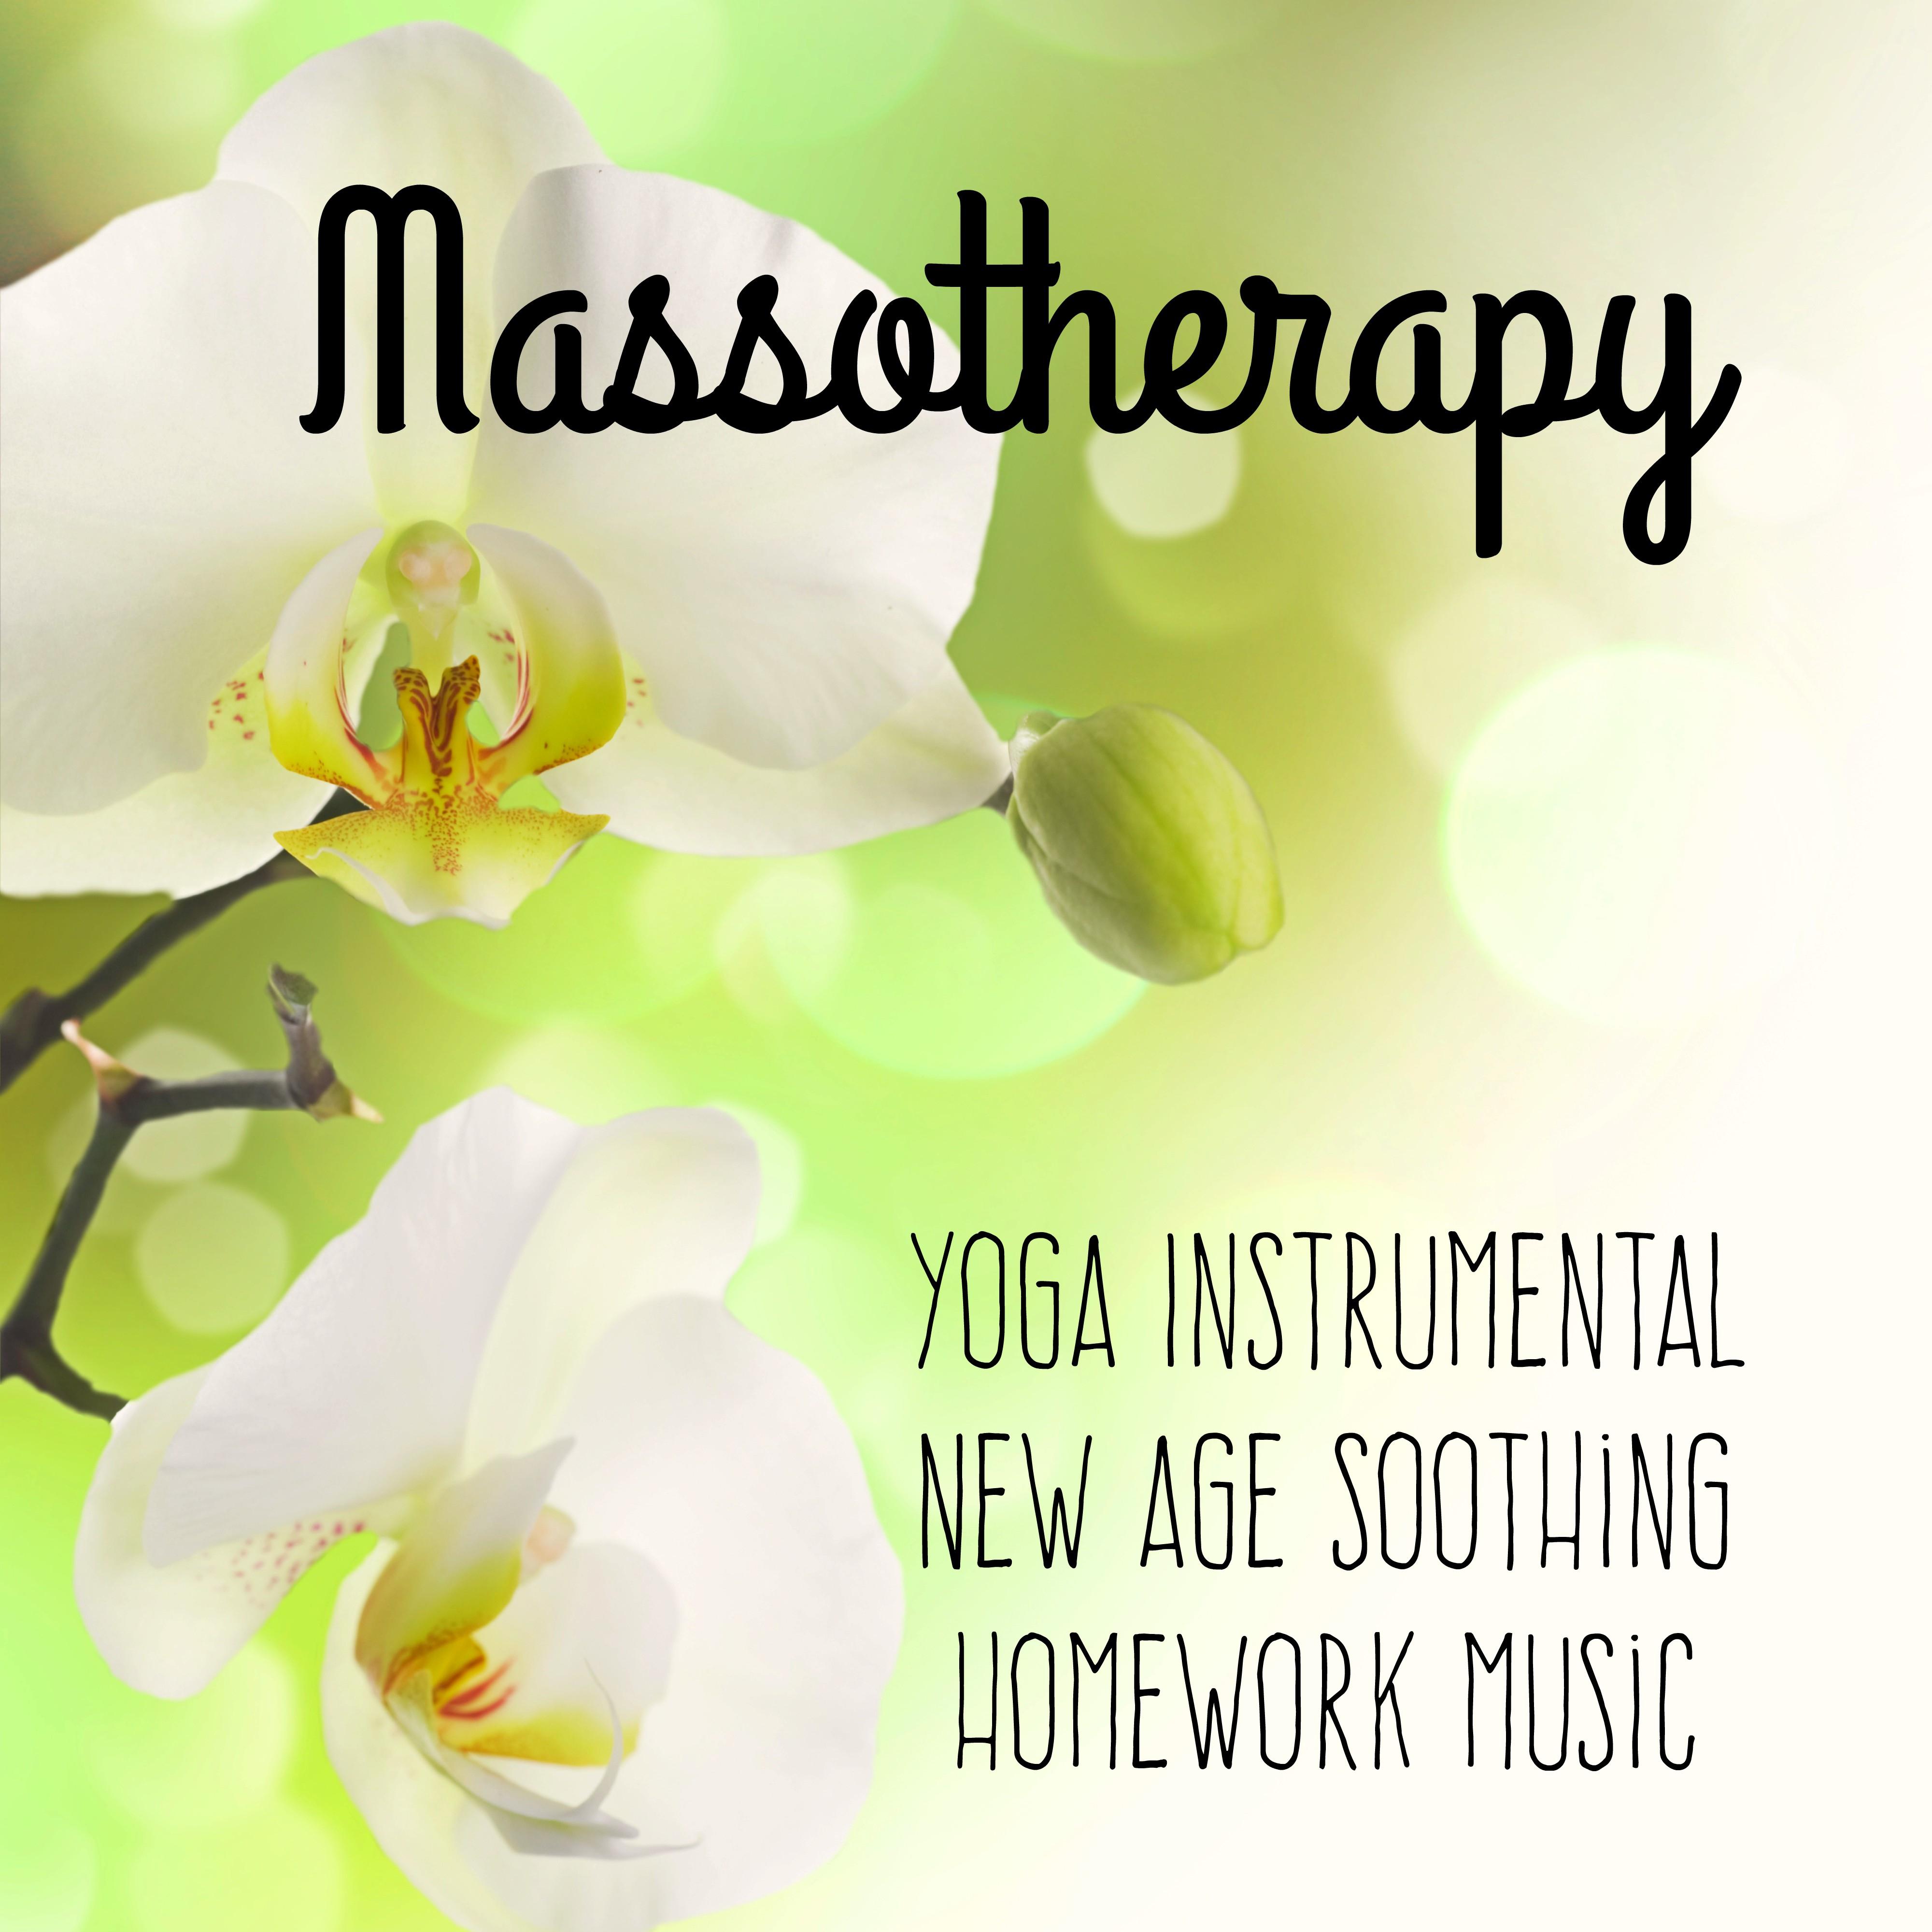 Massotherapy - Yoga Instrumental New Age Soothing Homework Music for Healing Massage Mind Exercises and Sleep Cycle